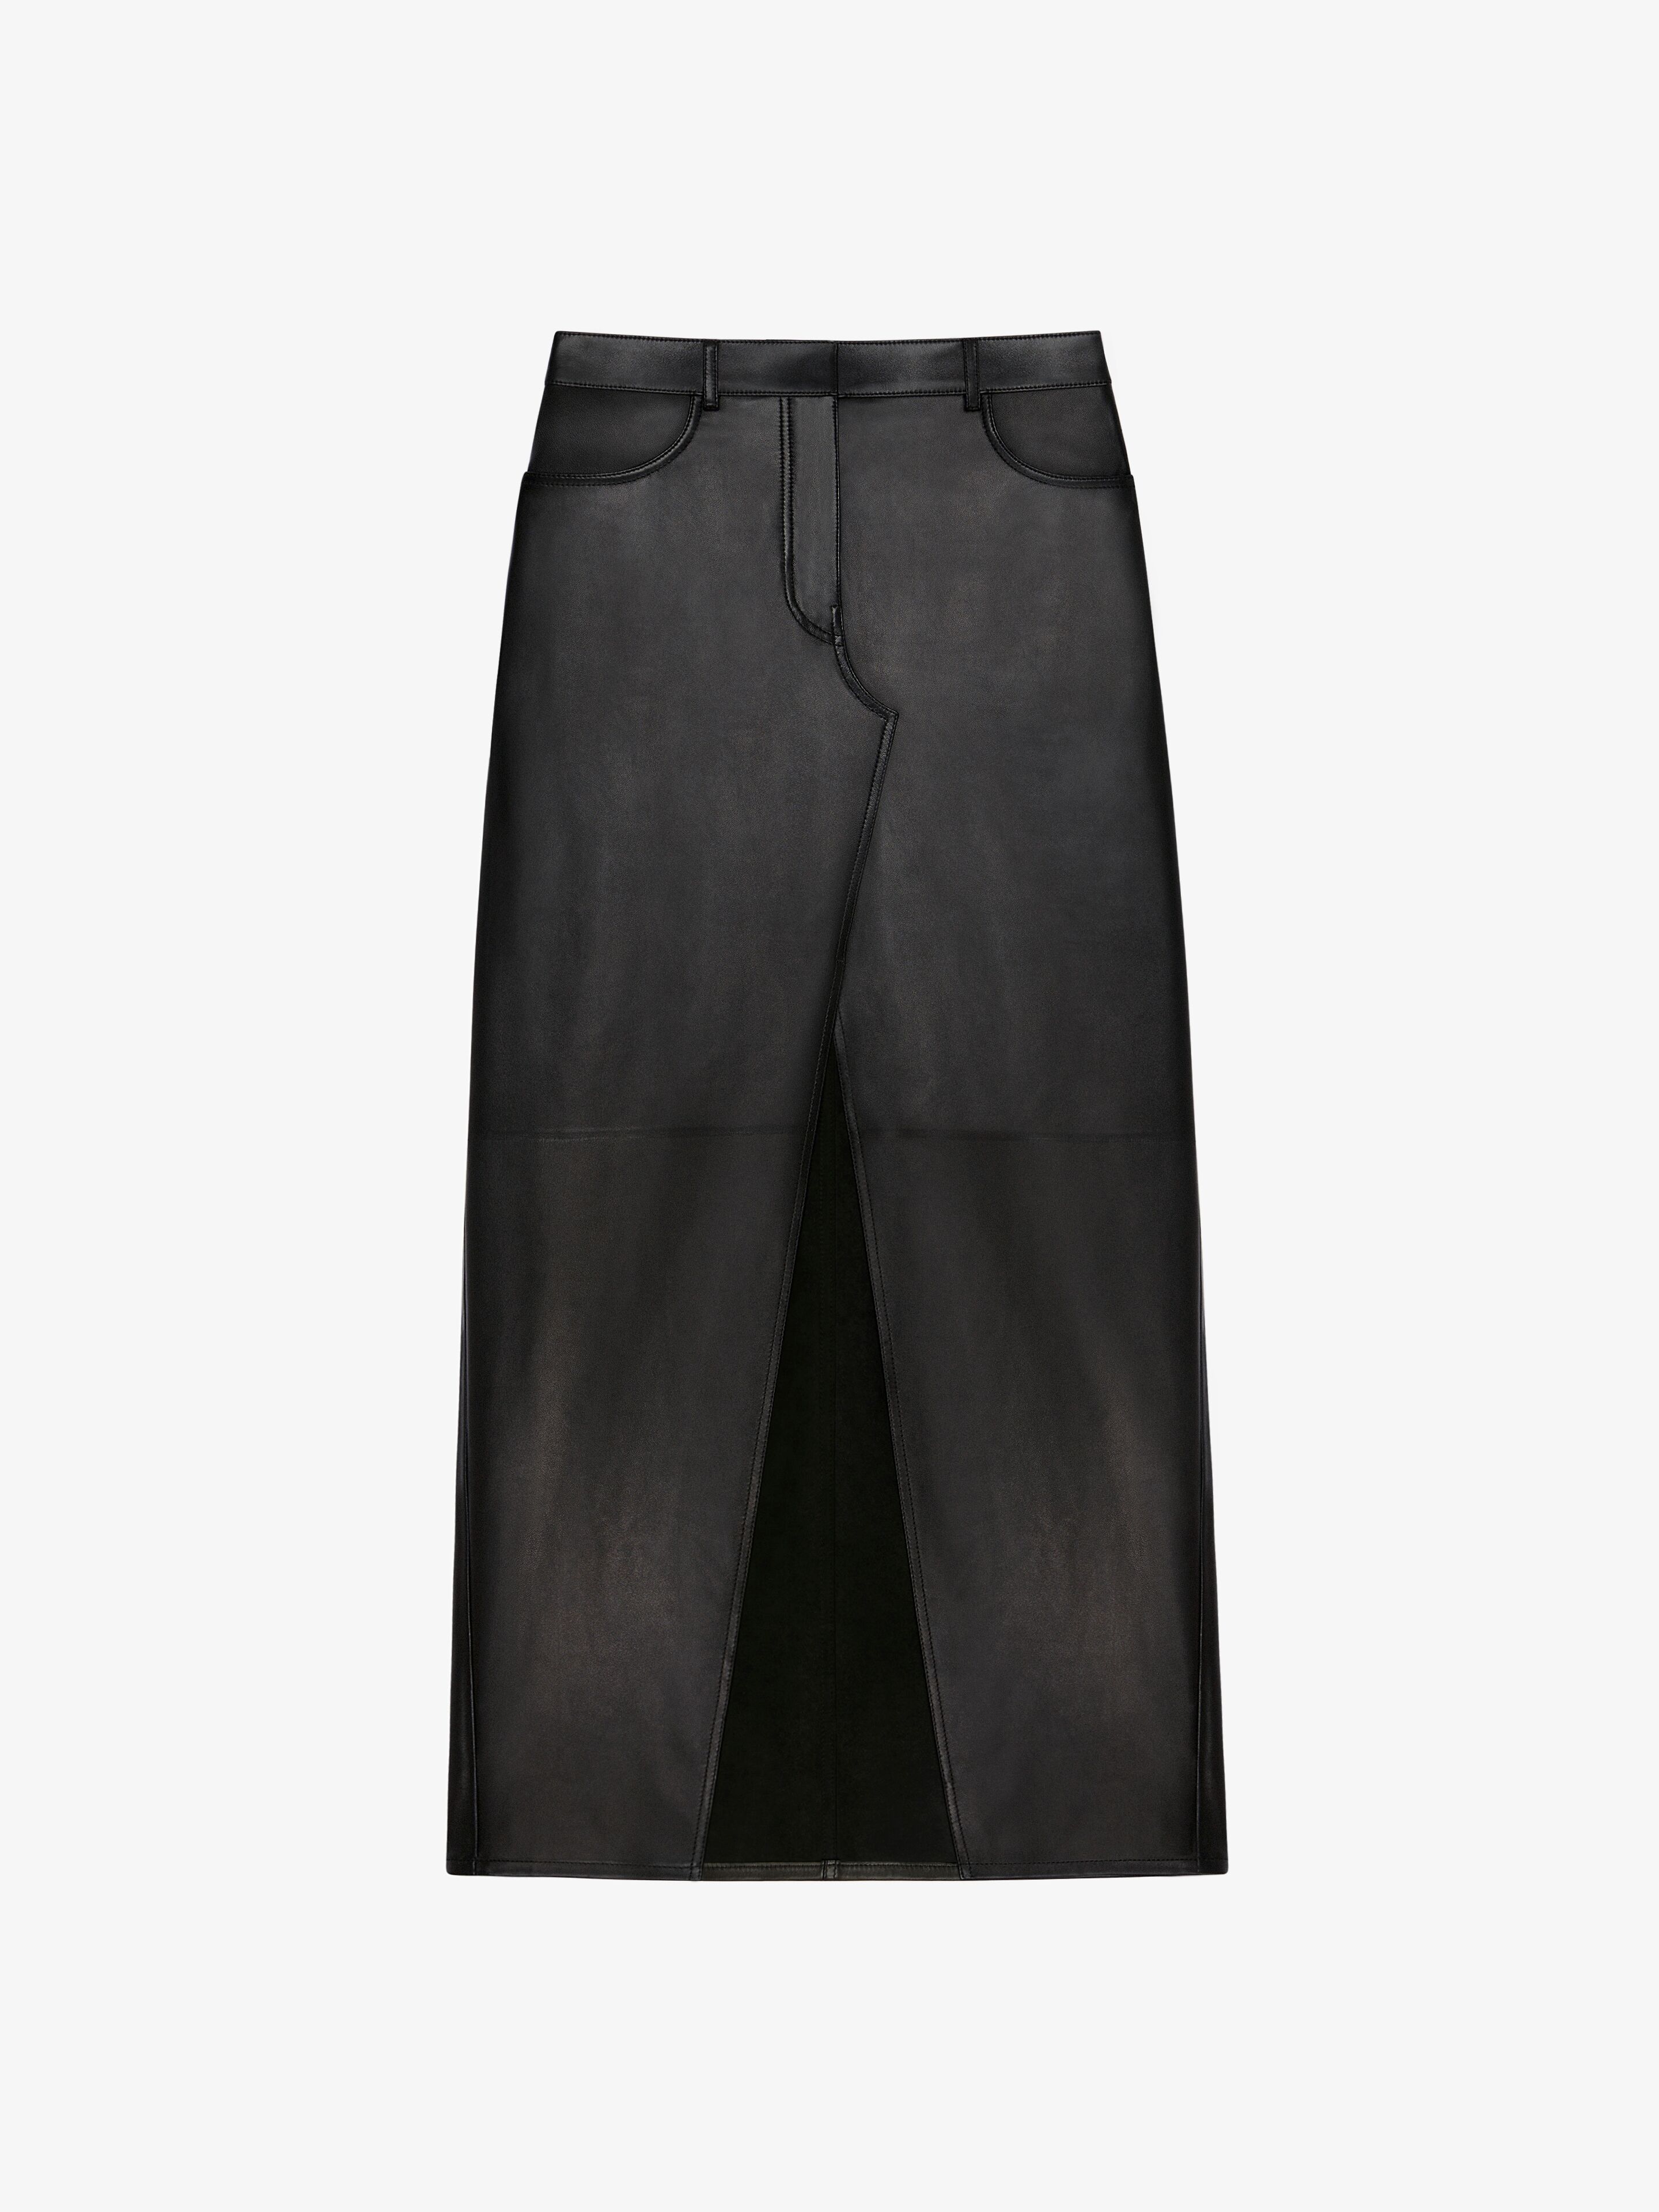 Givenchy Women's Skirt In Leather With Slit In Black